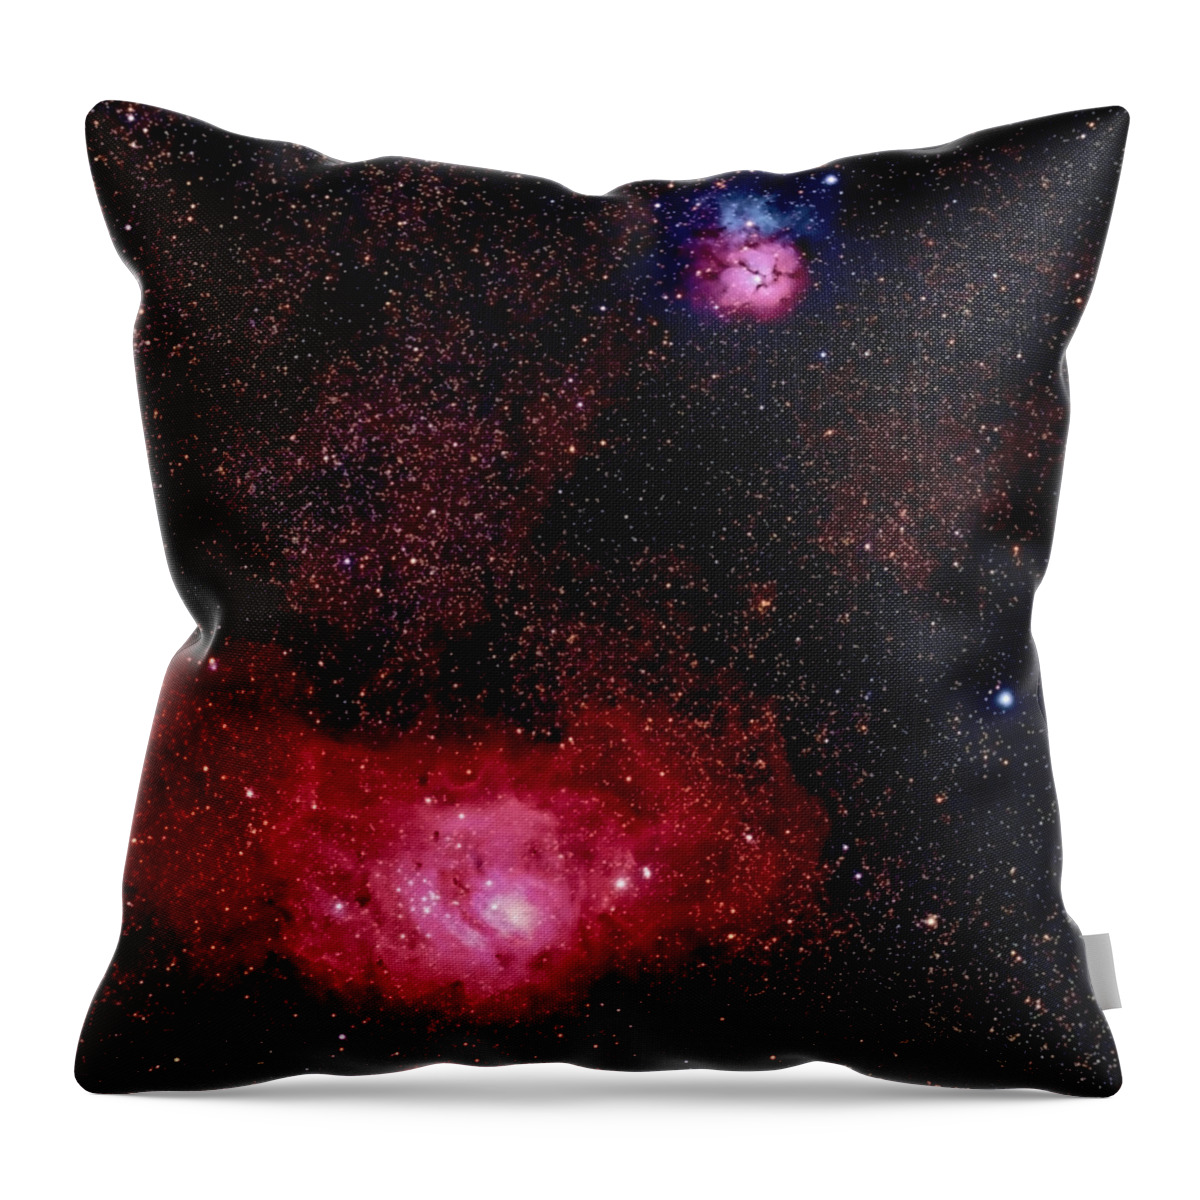 New Mexico Throw Pillow featuring the photograph M8 The Lagoon Nebula And M20 The Trifid by A. V. Ley